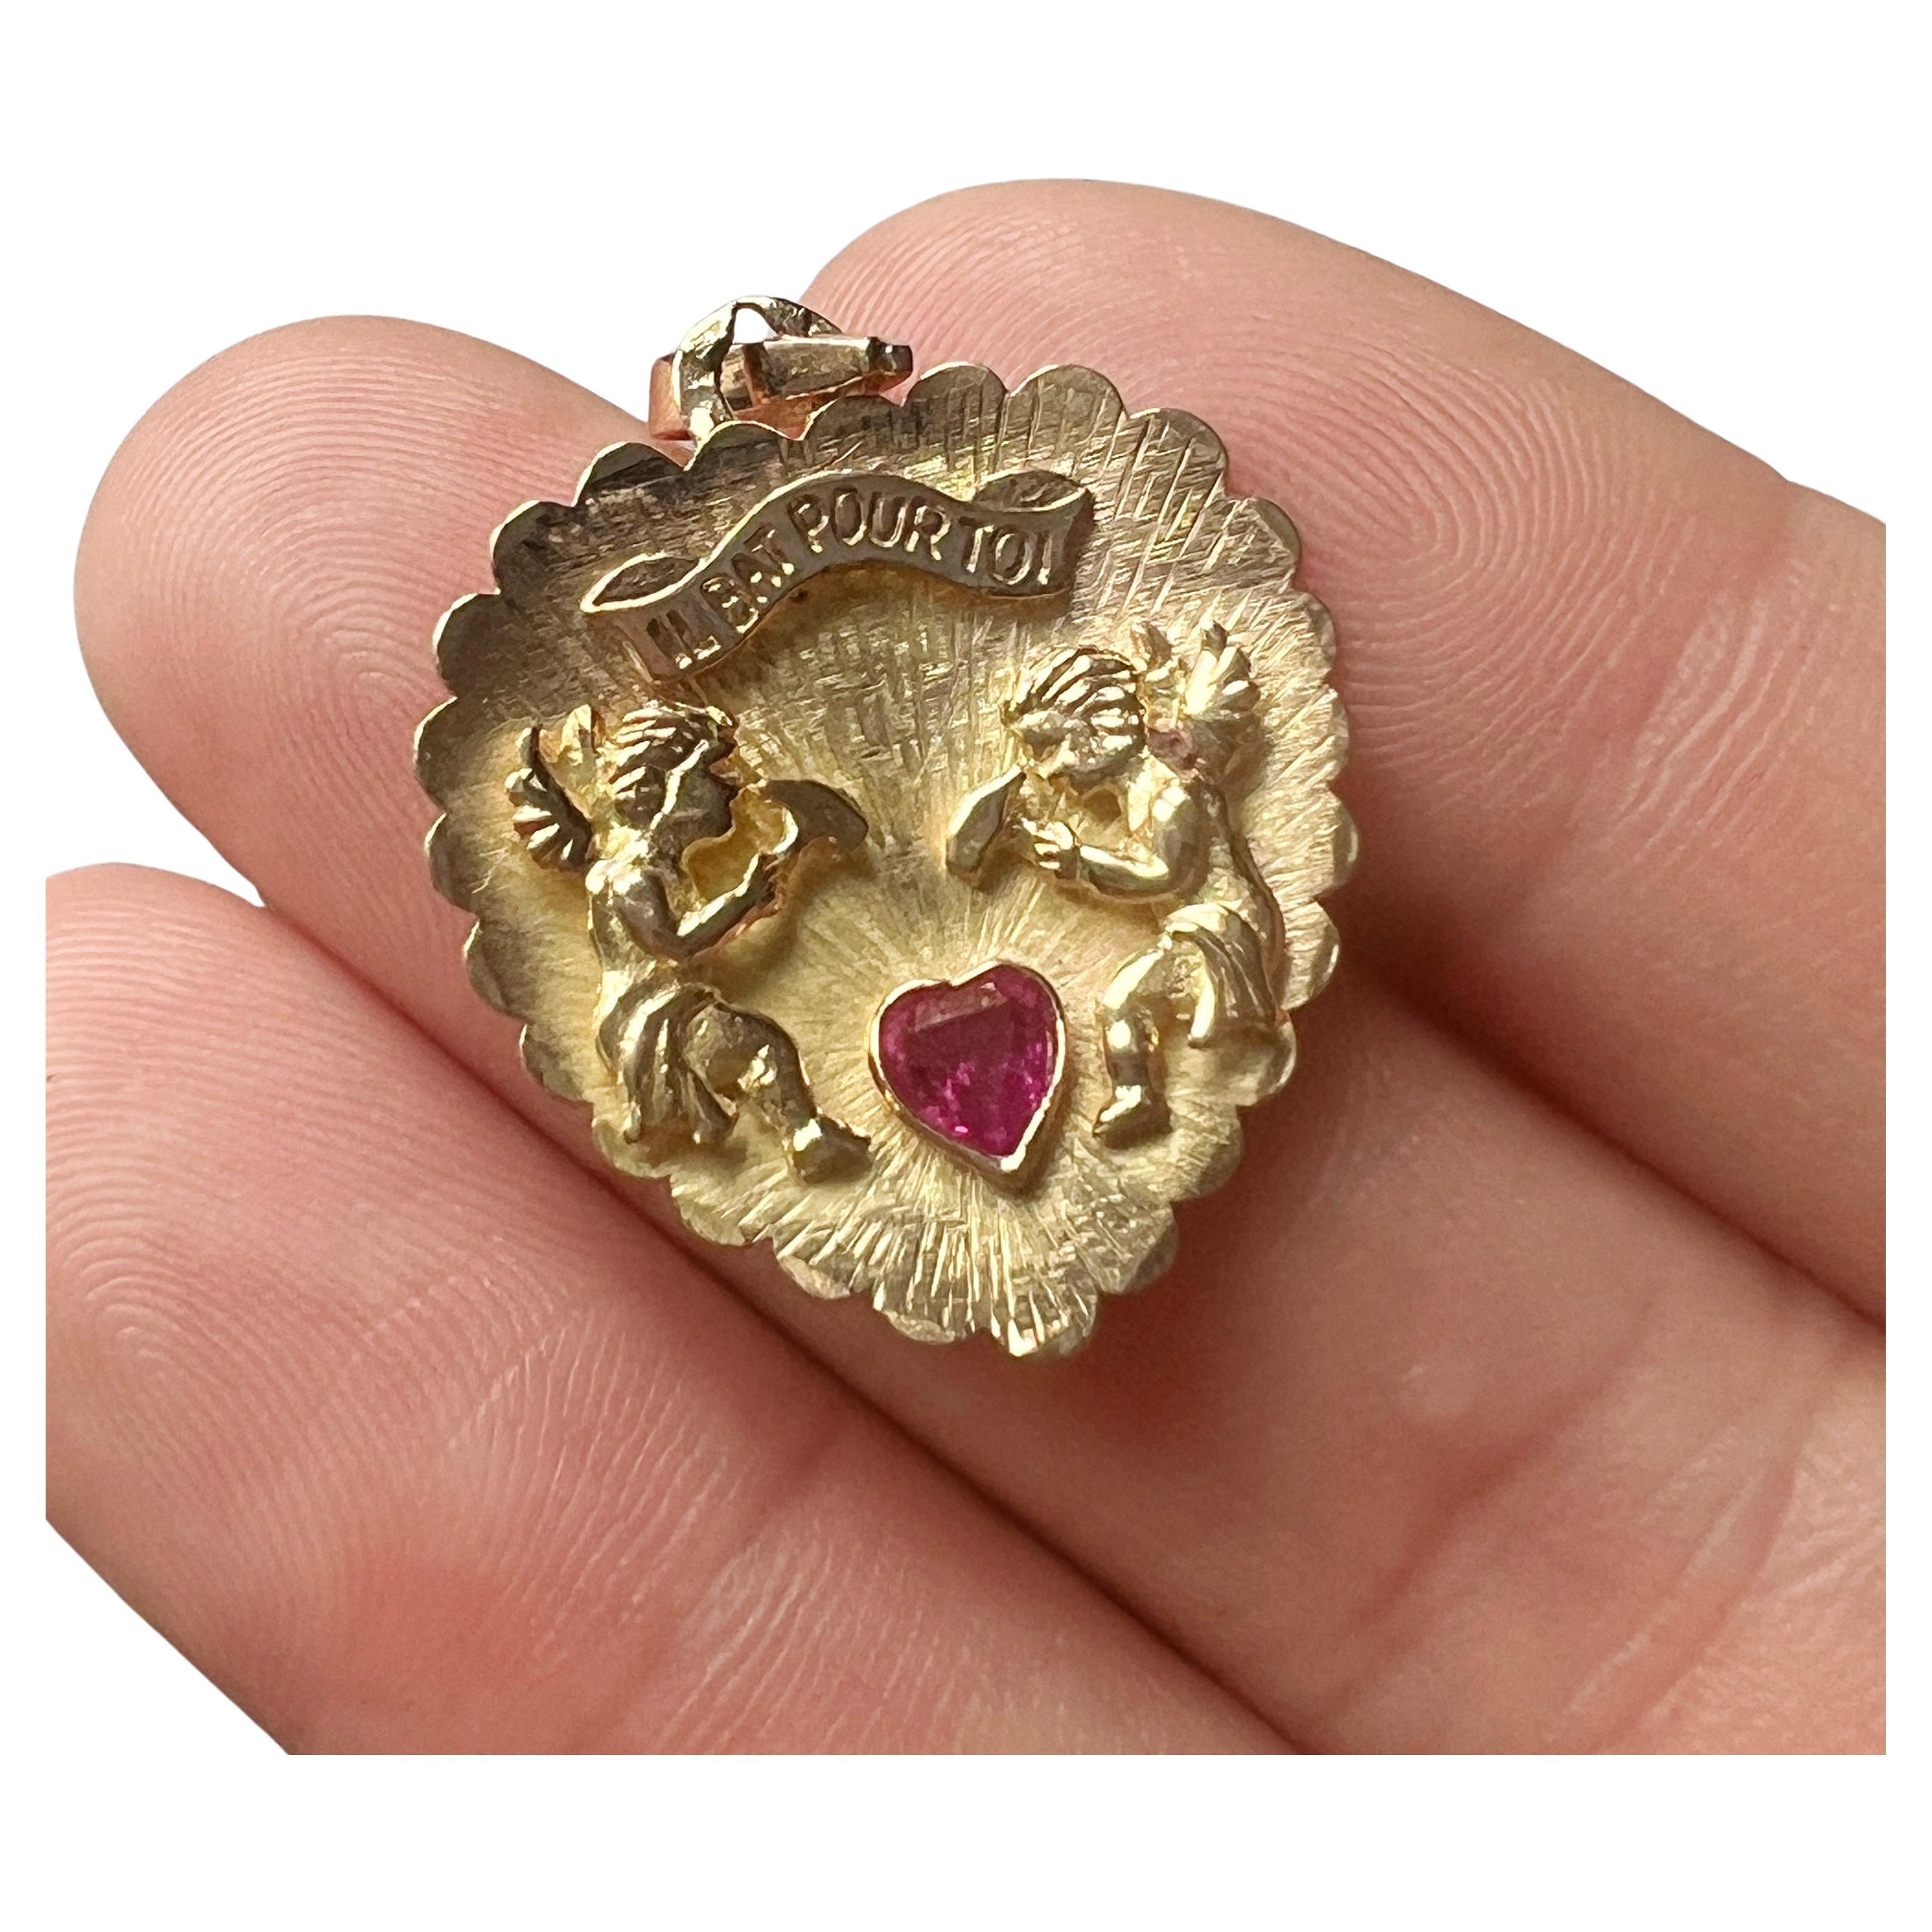 For sale a romantic 18K gold pendant, expressing love and devotion captured in a heart-shaped masterpiece. The pendant is a French work and it features two winged angels, each delicately wielding a hammer, symbolizing the gentle beating of a shared